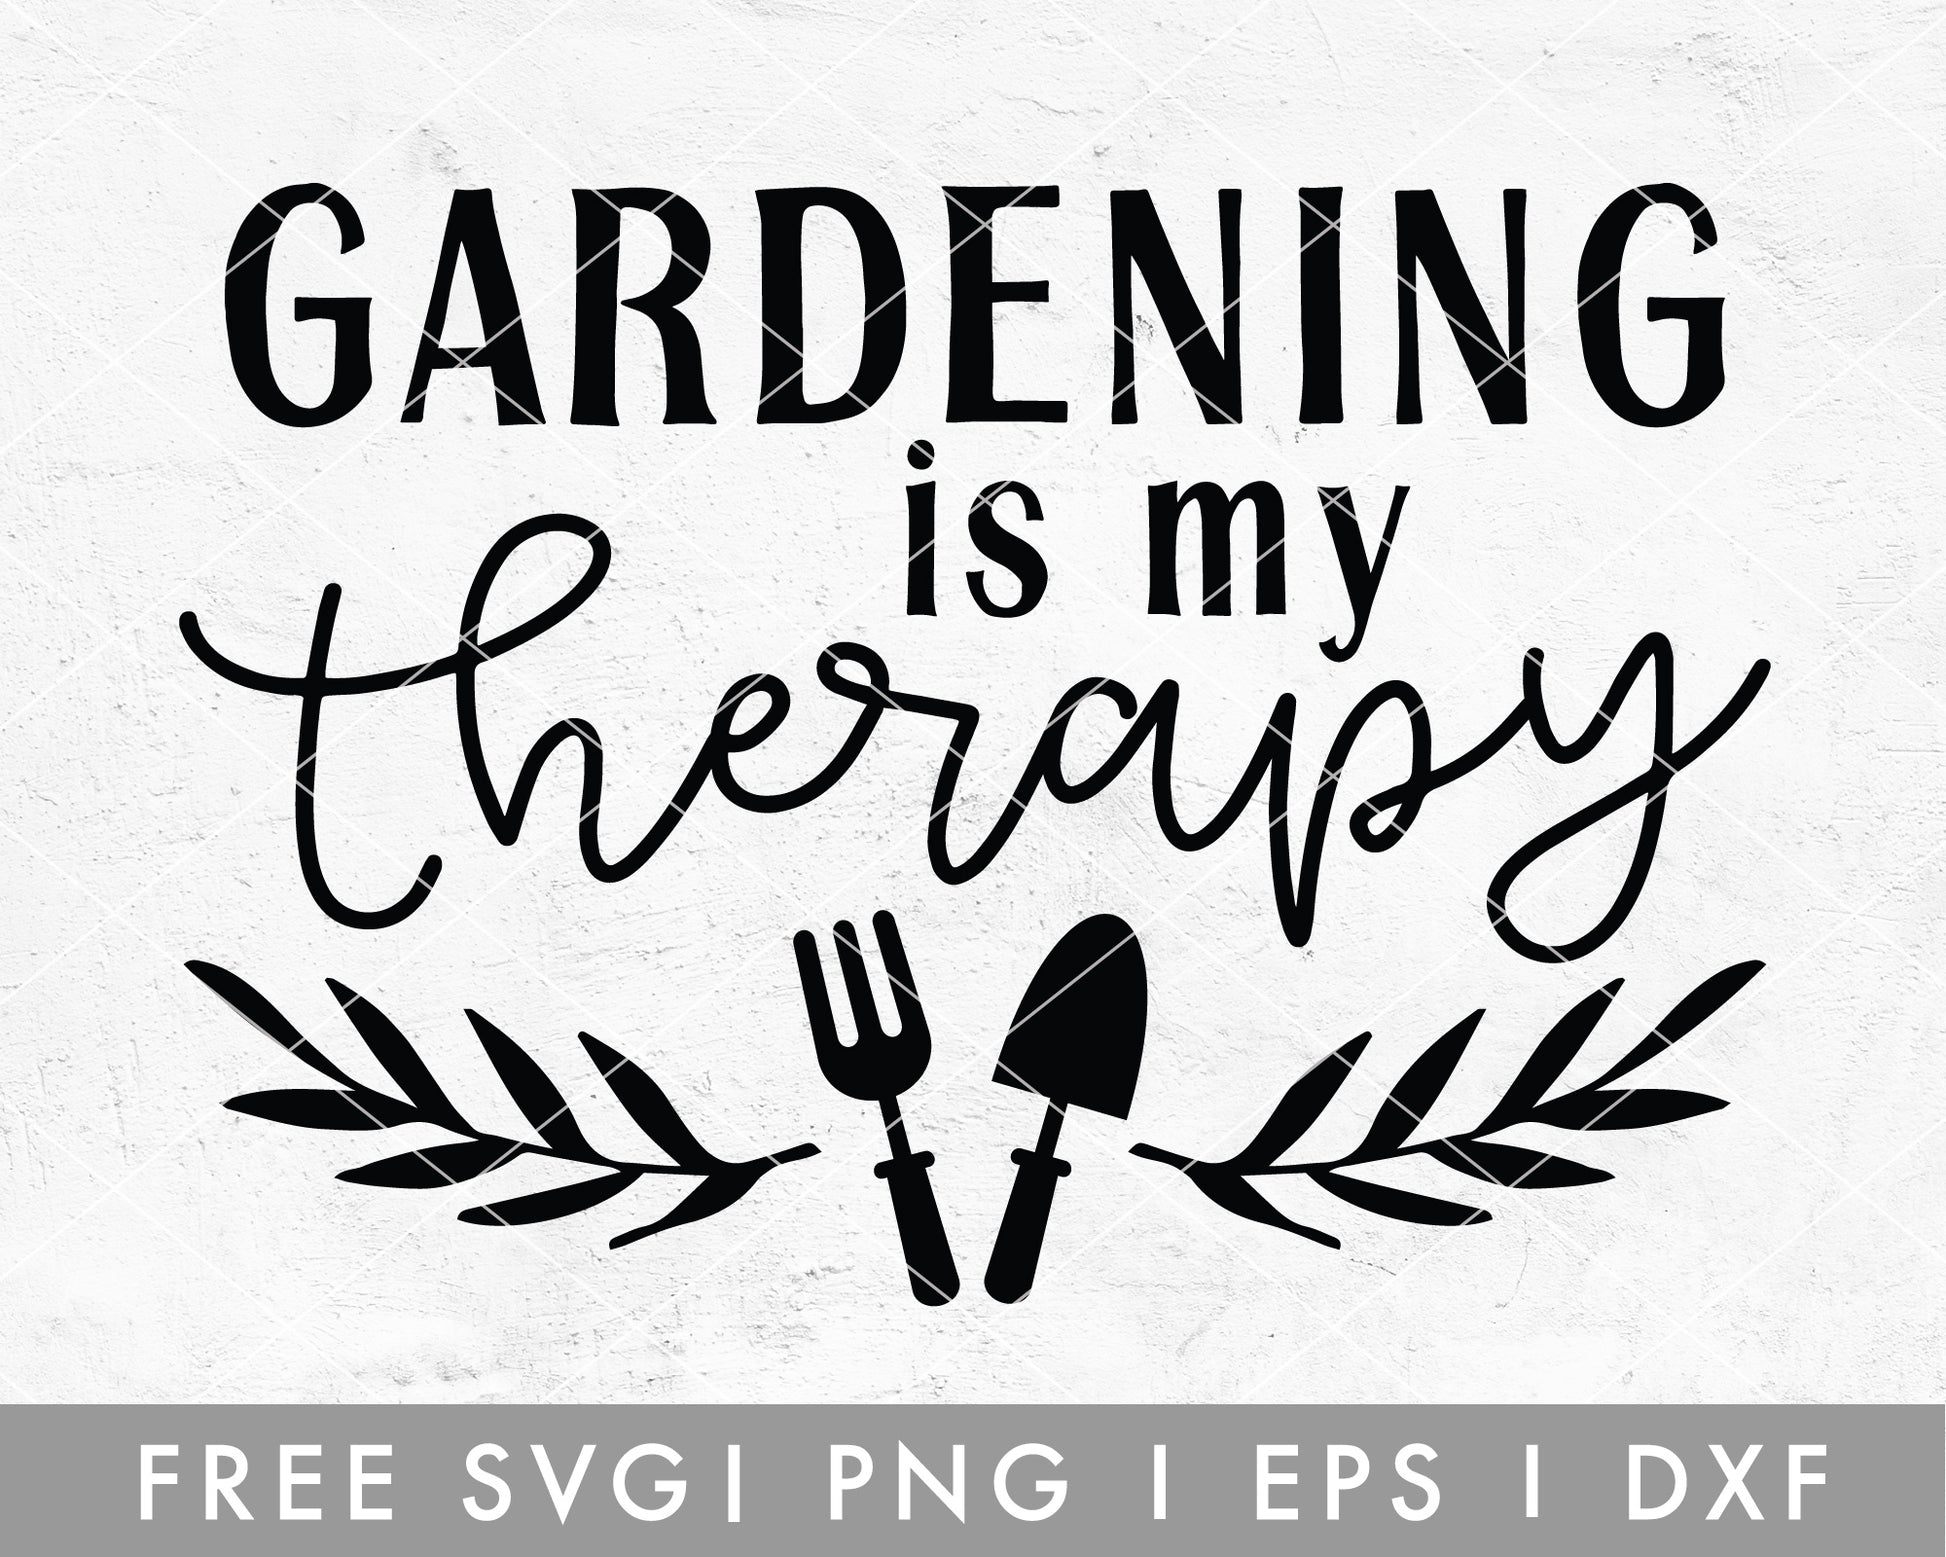 FREE Garden SVG | Gardening Is My Therapy Cut File for Cricut, Cameo Silhouette | Free SVG Cut File